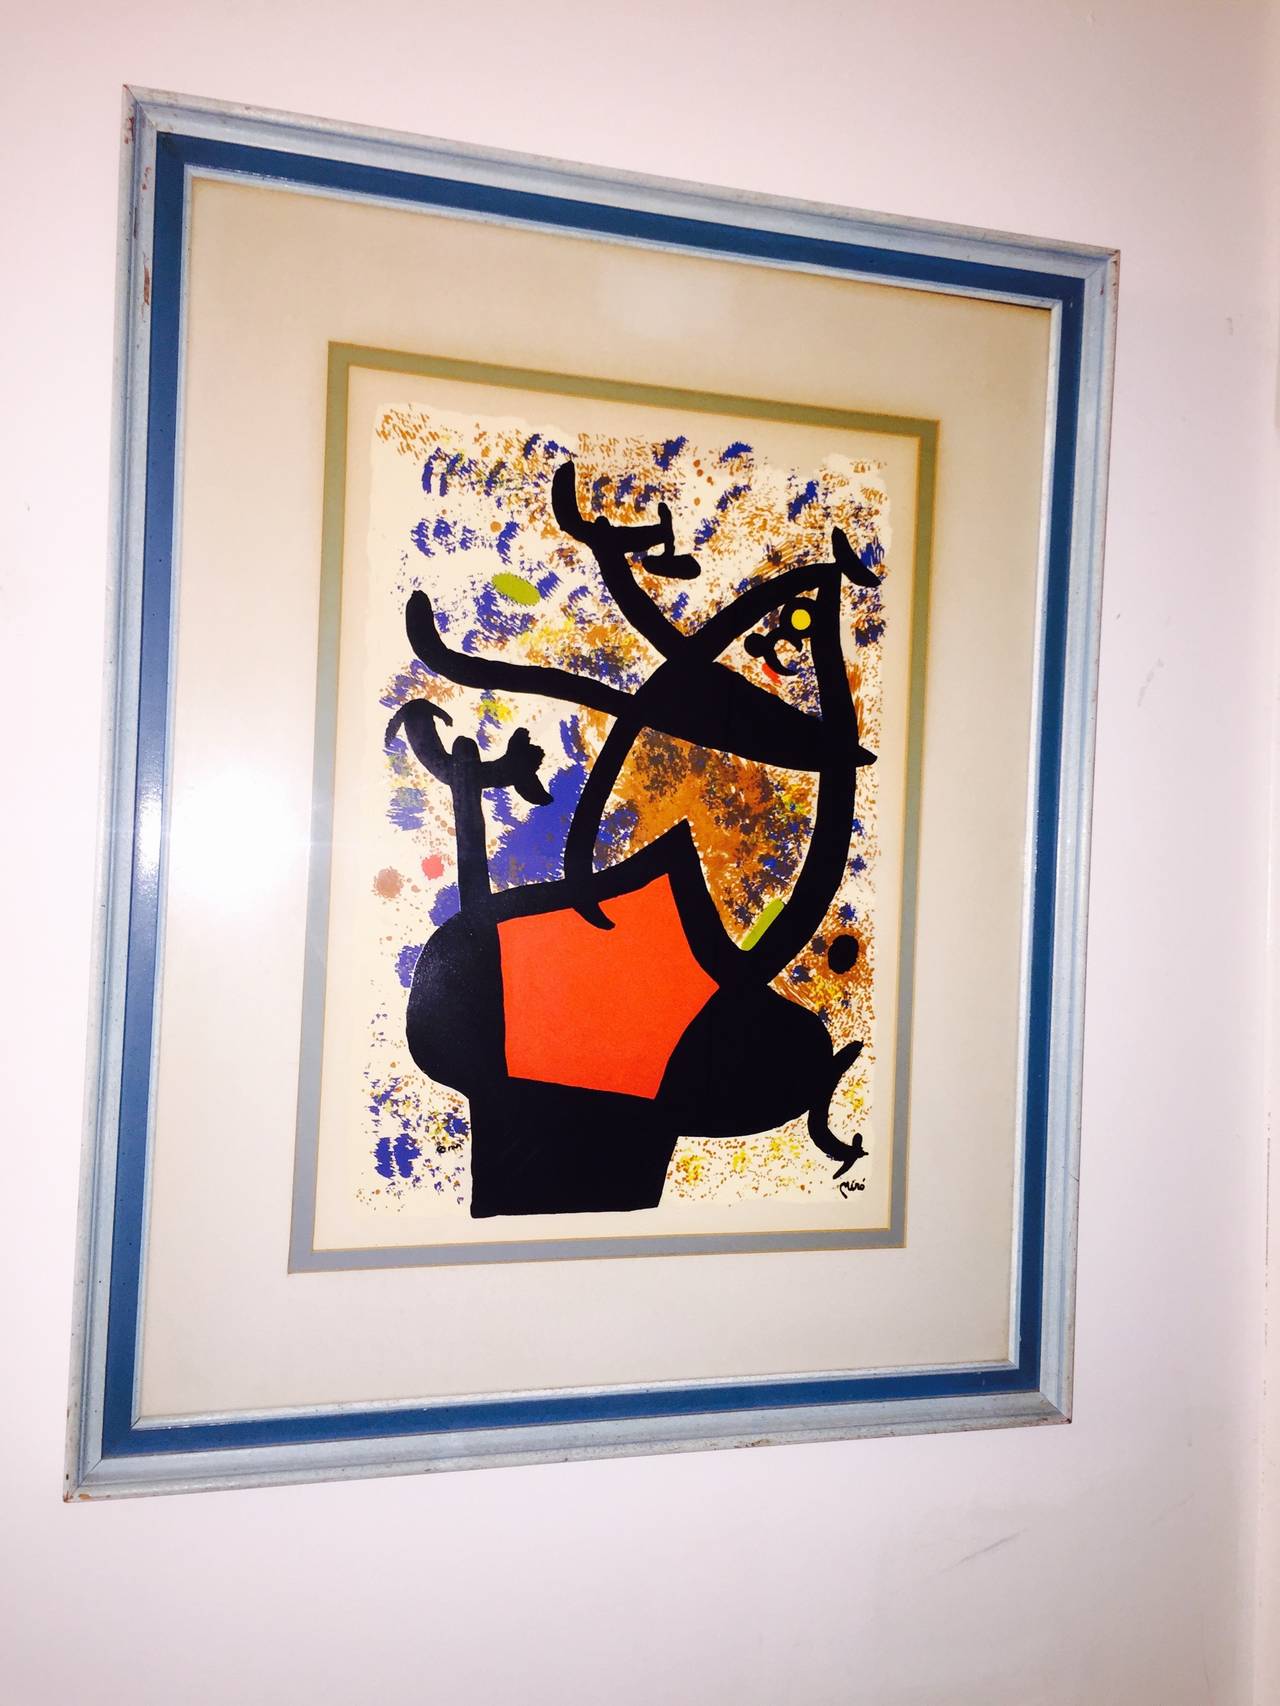 Beautiful vintage large color lithograph by Joan Miró. Vibrant colors in the Classic Miro form. Signed in the plate. Framed in a vintage blue wood frame behind glass.